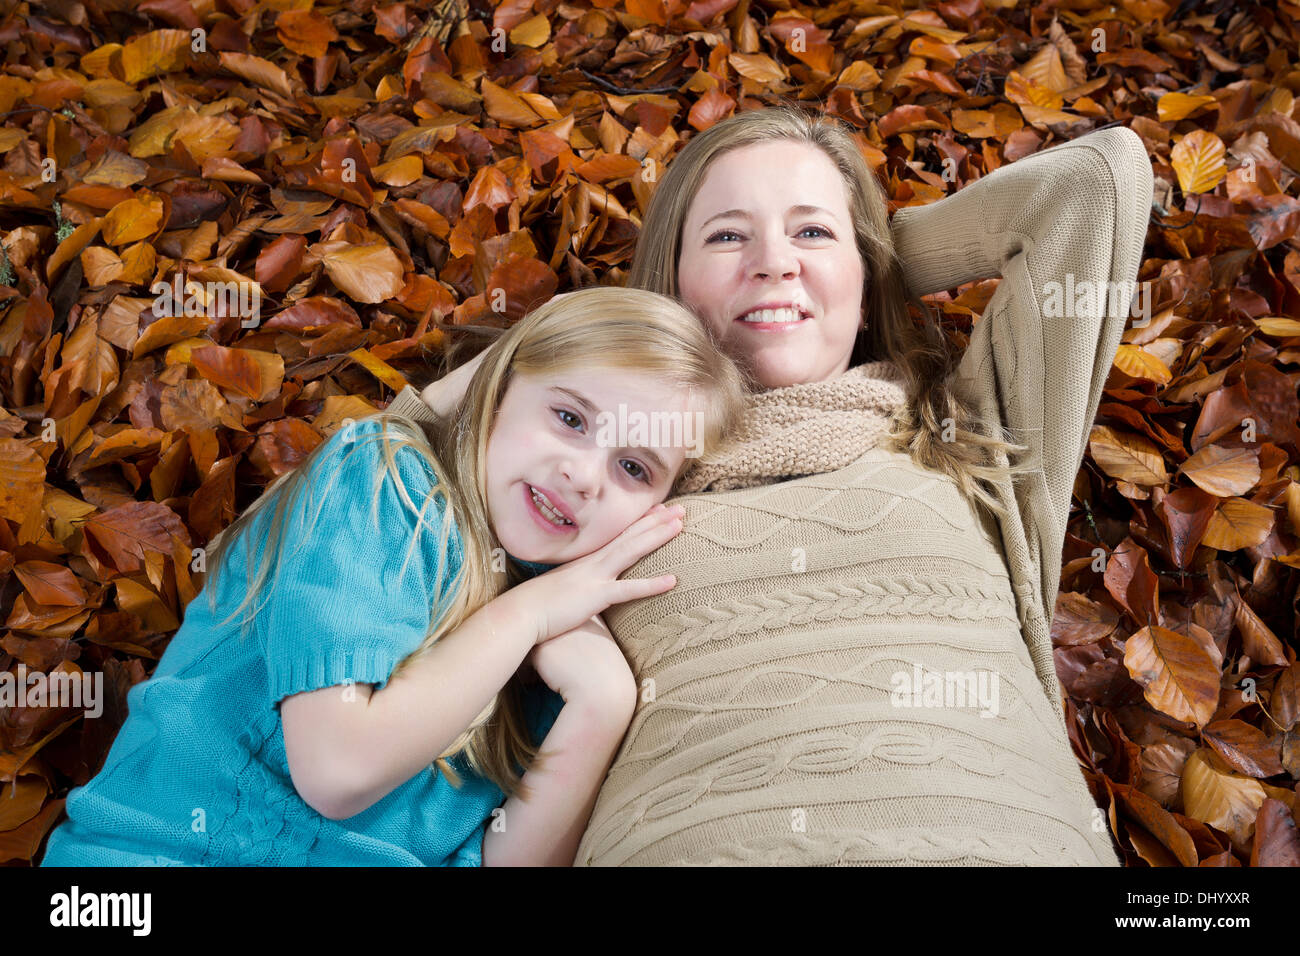 Horizontal photo of a happy mother with her young daughter resting on a bed of autumn leaves Stock Photo